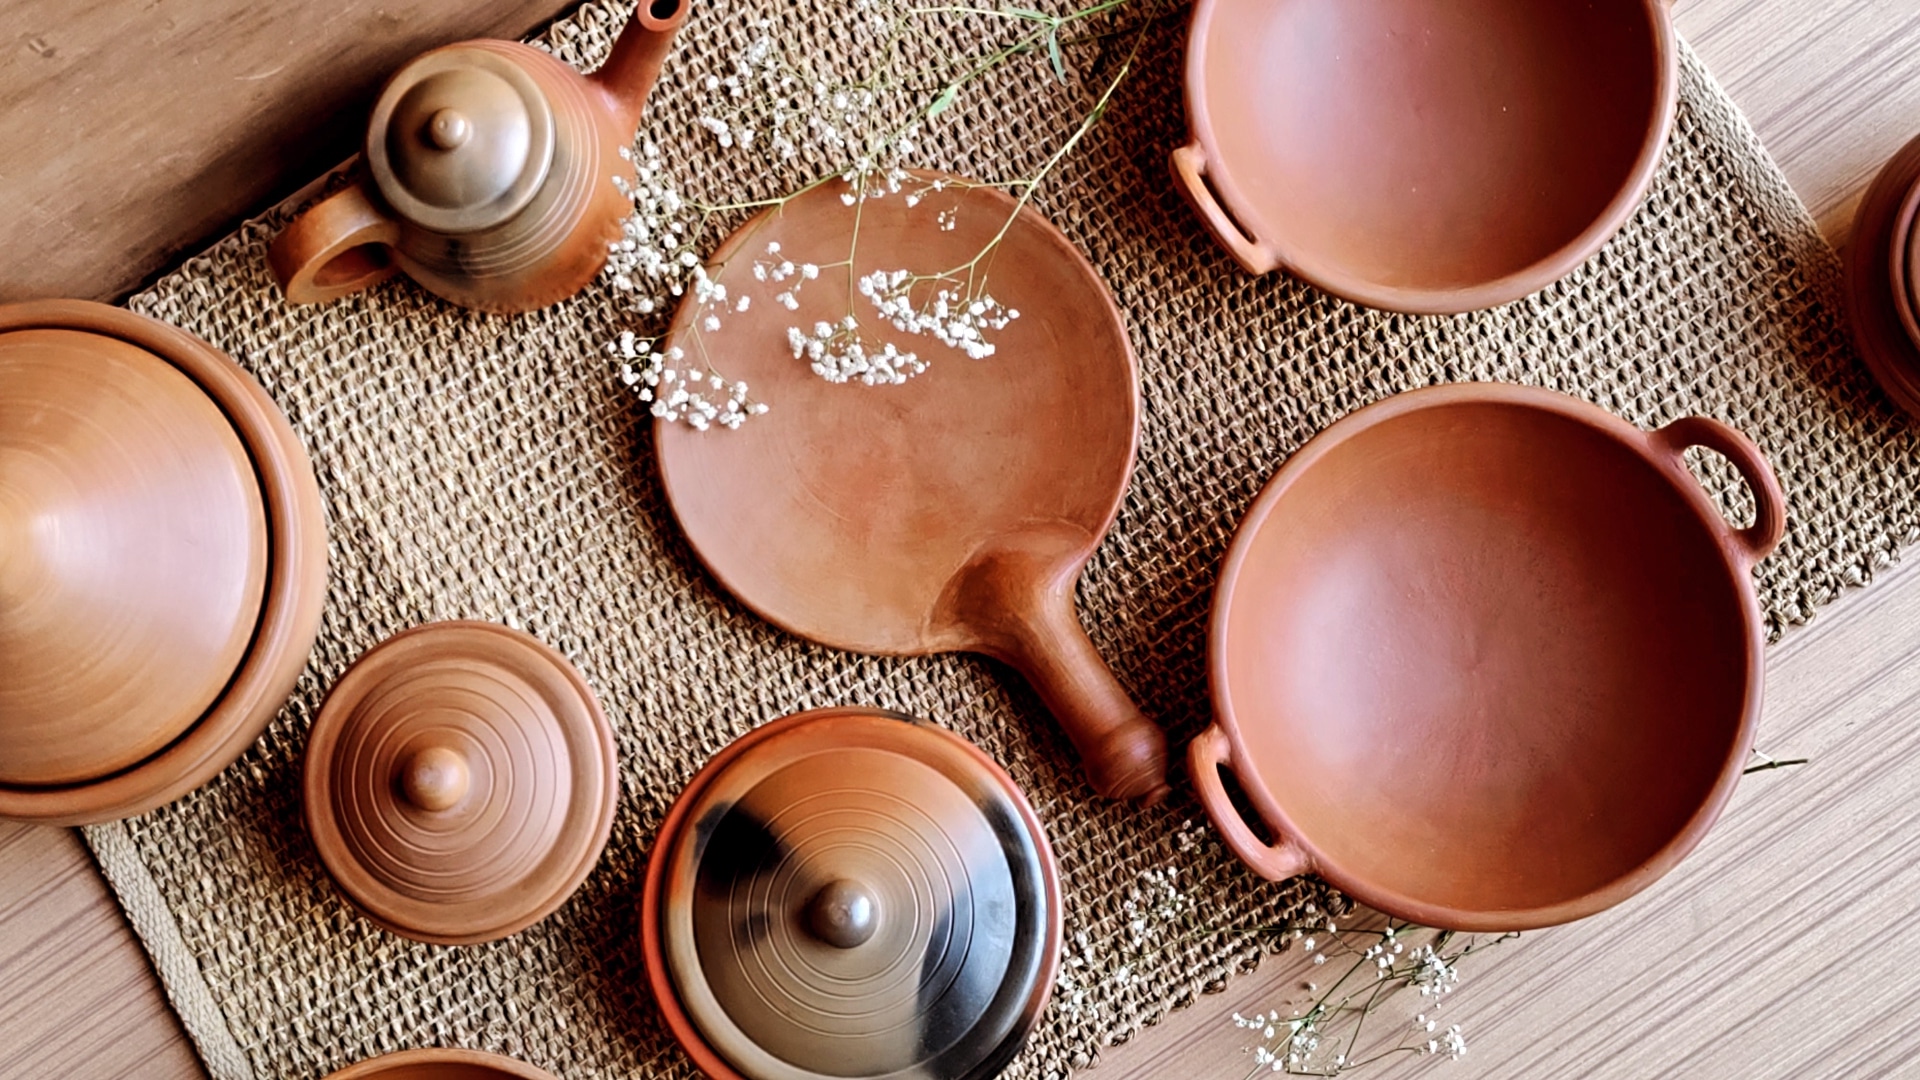 The Science Of Healthy Cooking In Clay Pots by Opaque Studio